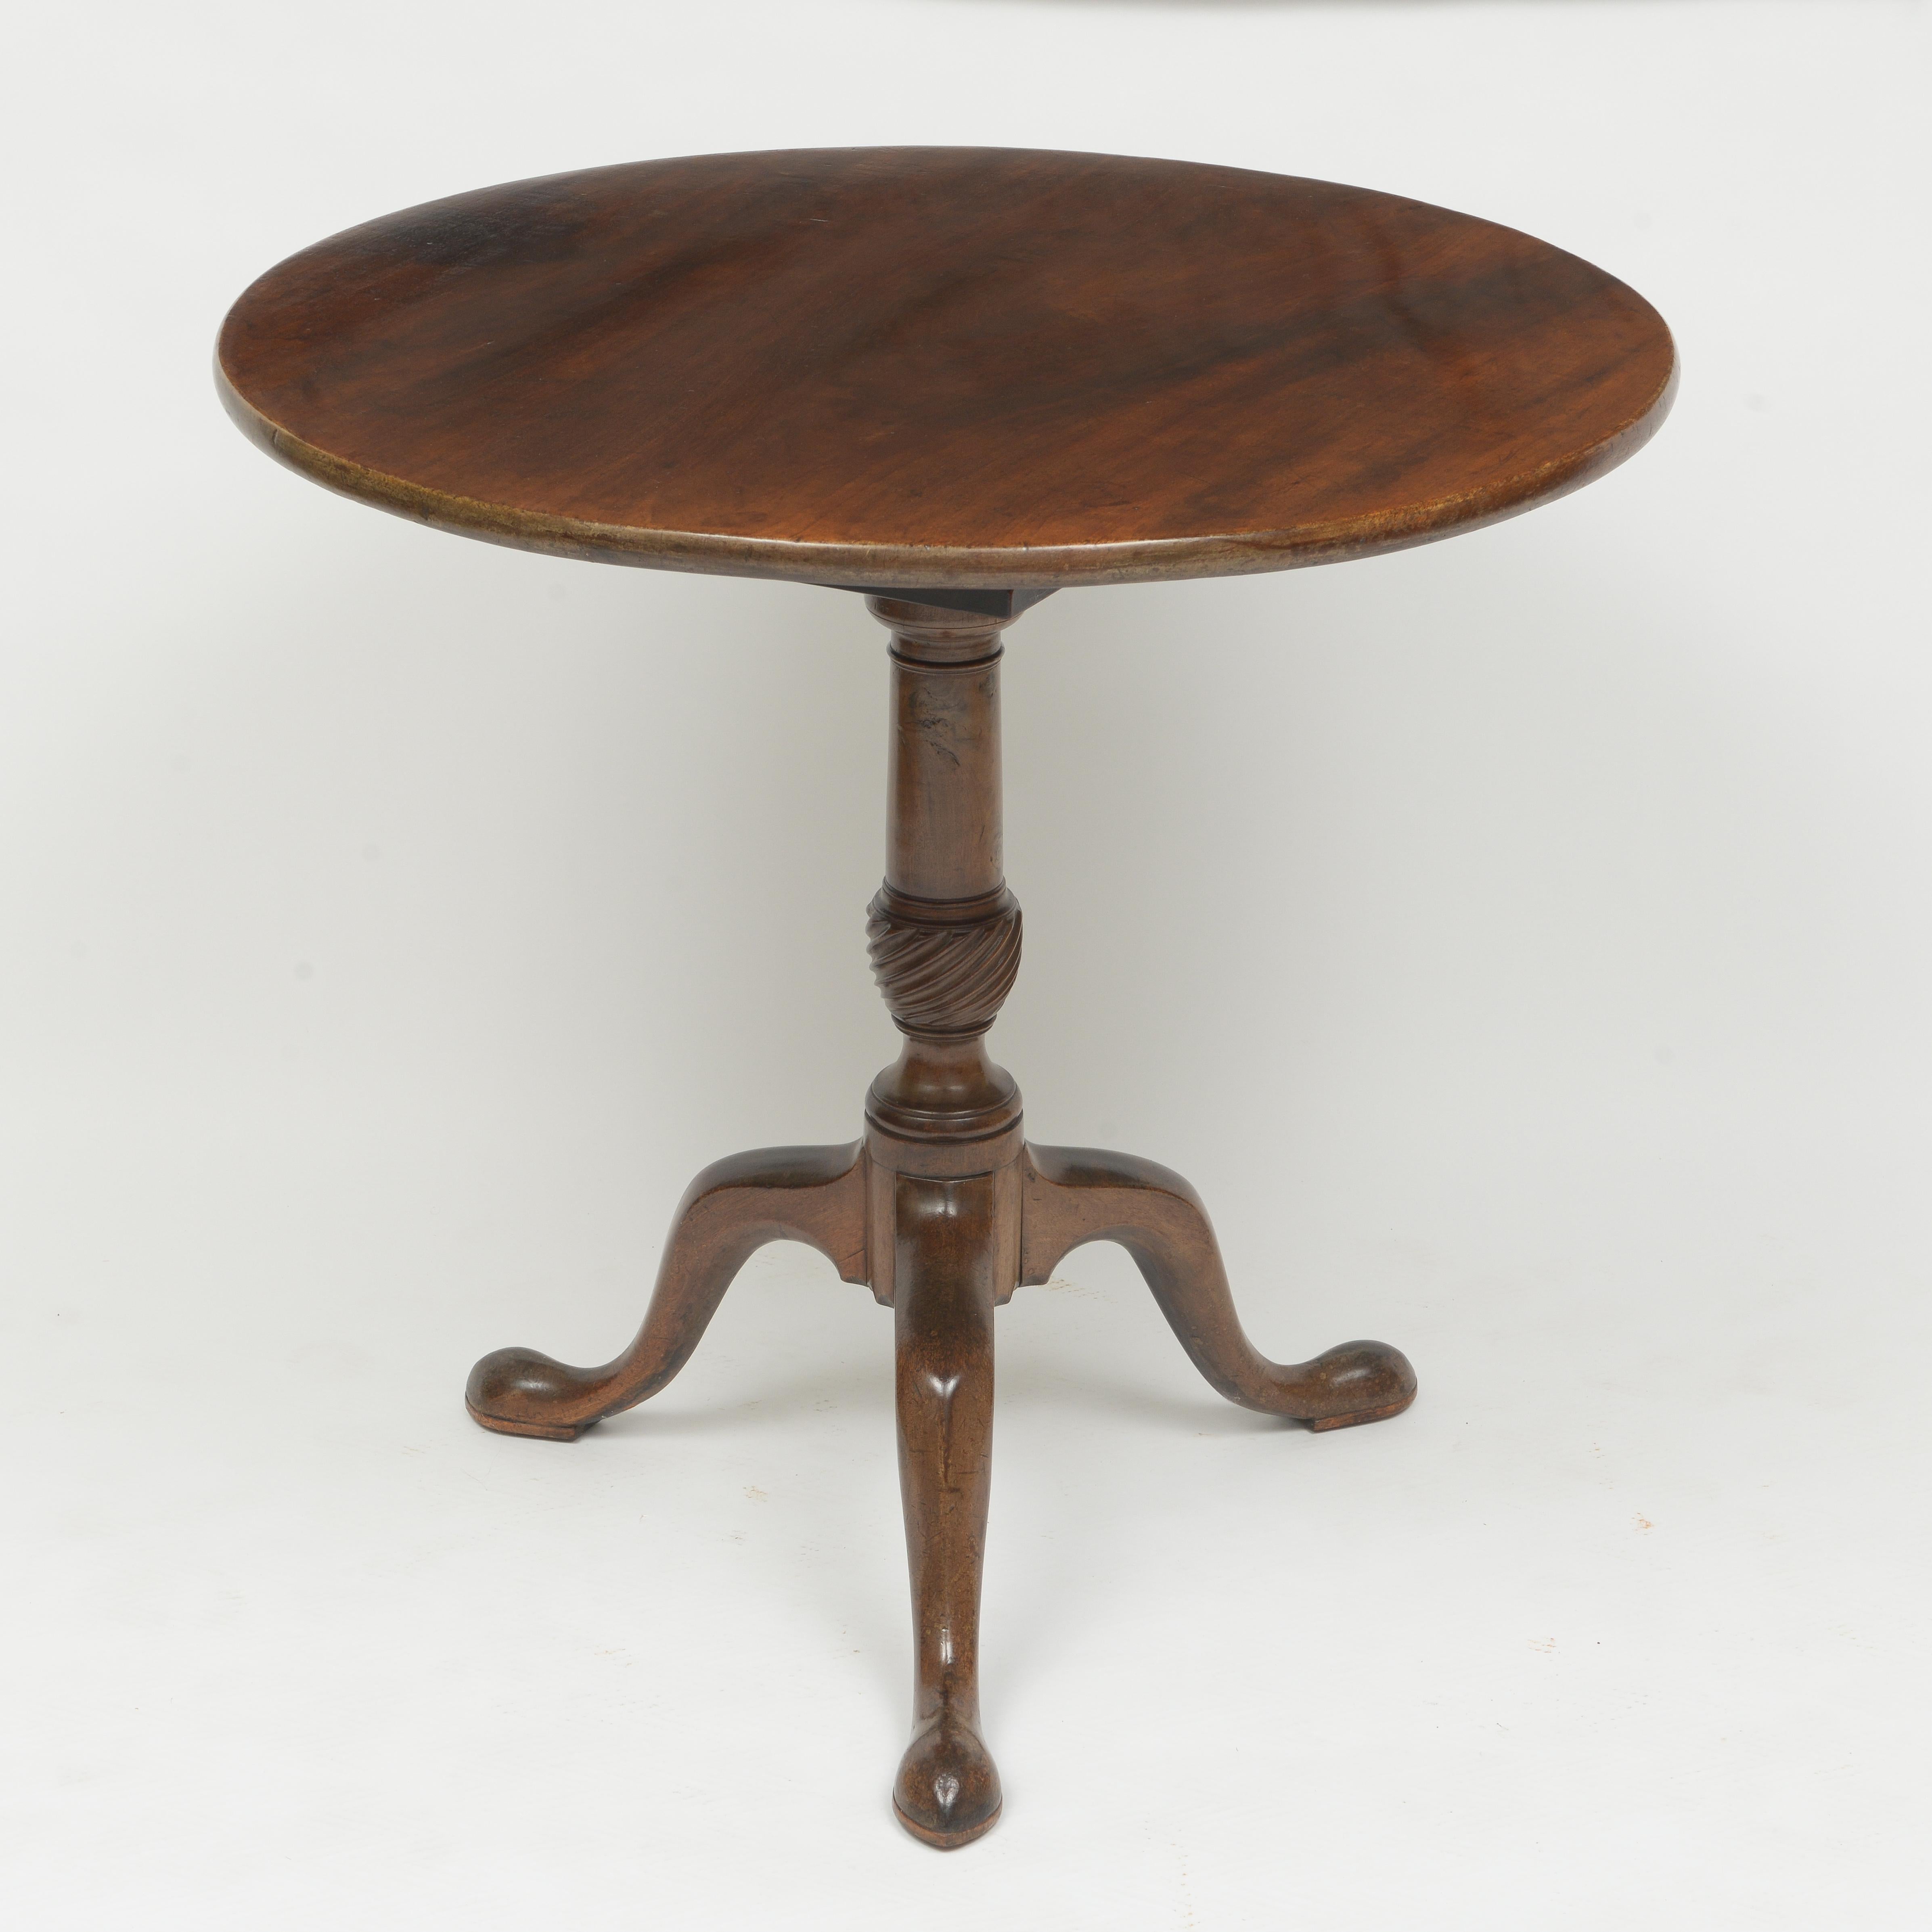 Hand-Crafted Round Top Tripod Table in Walnut Finished With Shellac and Wax Finish For Sale